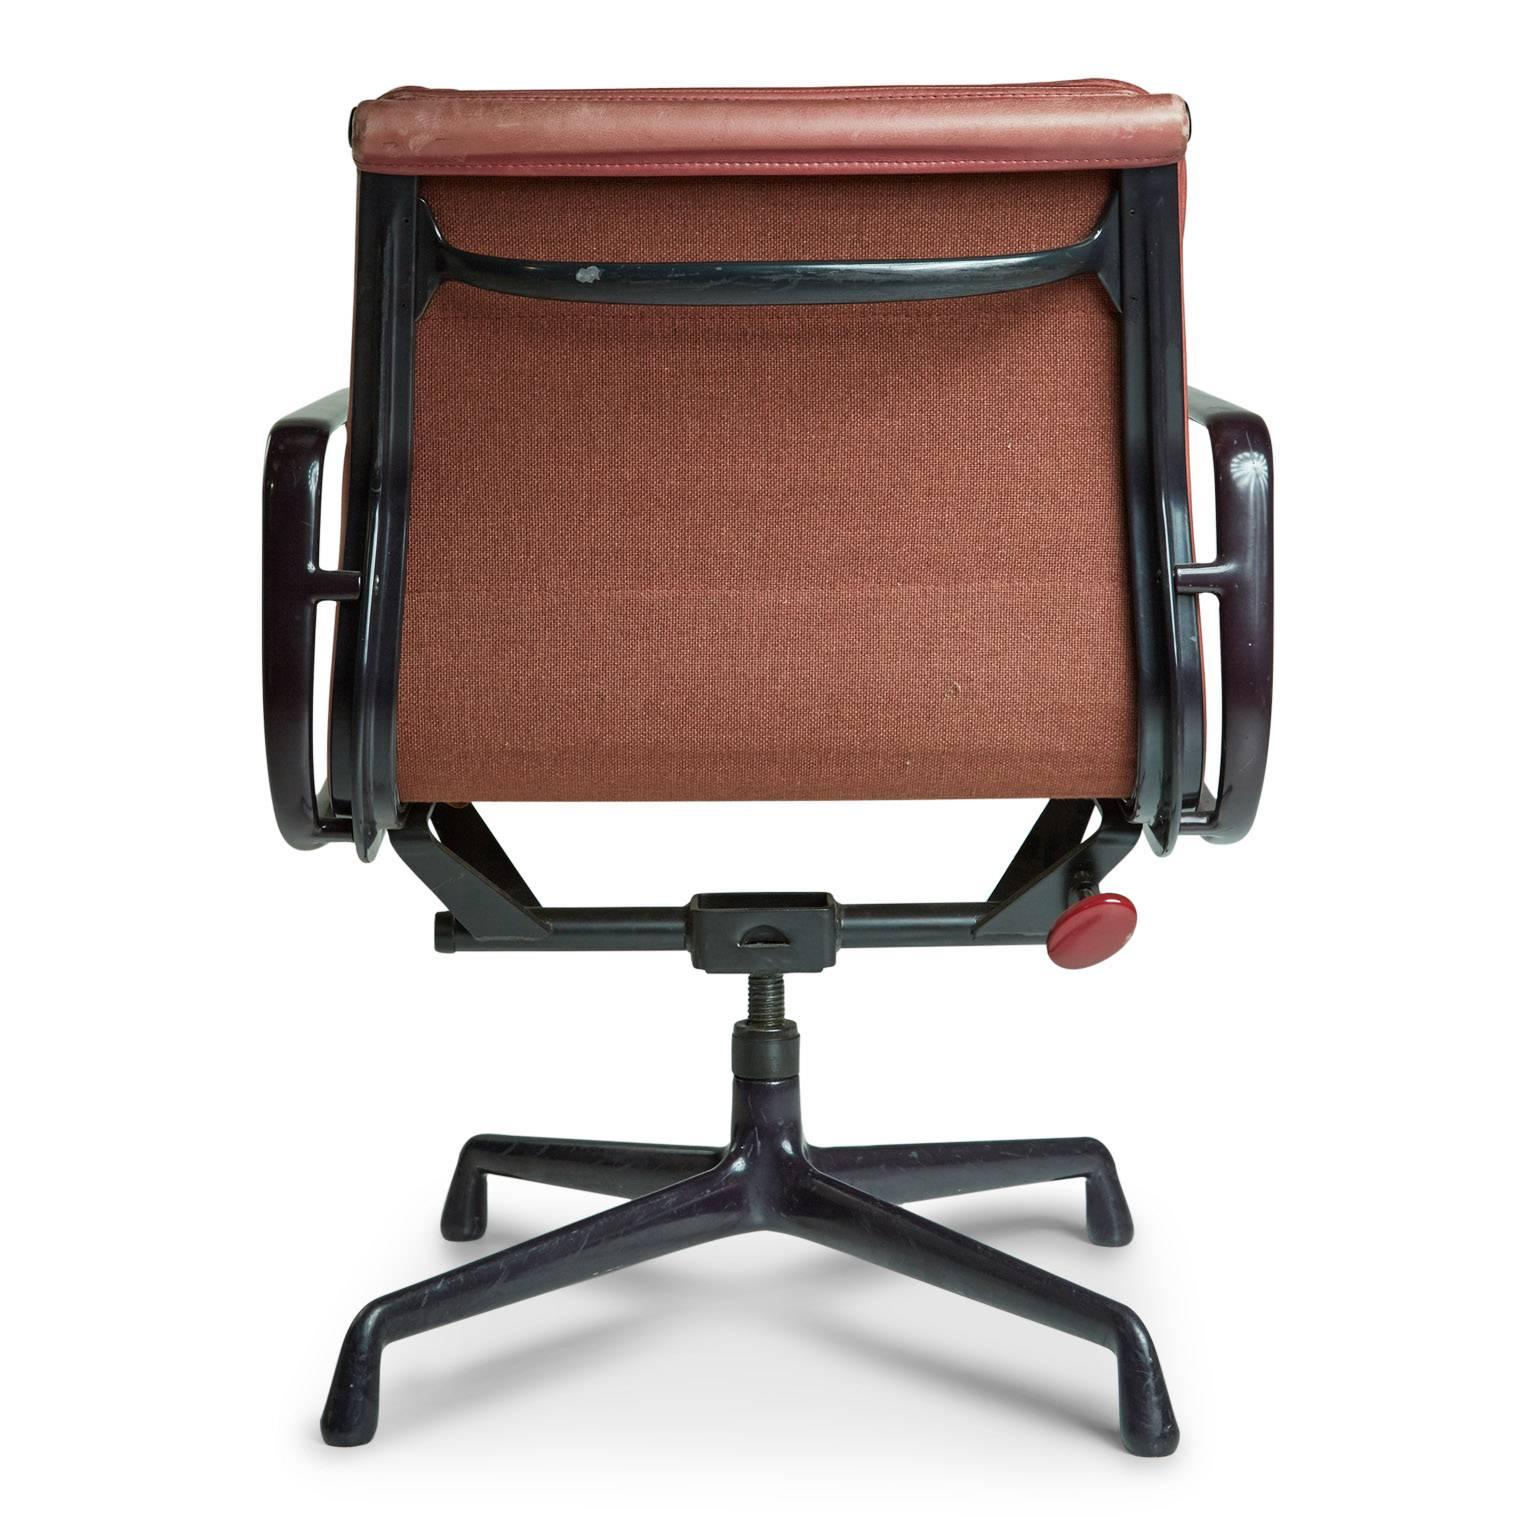 American Soft Pad Management and Executive Desk Chairs by Charles Eames for Herman Miller